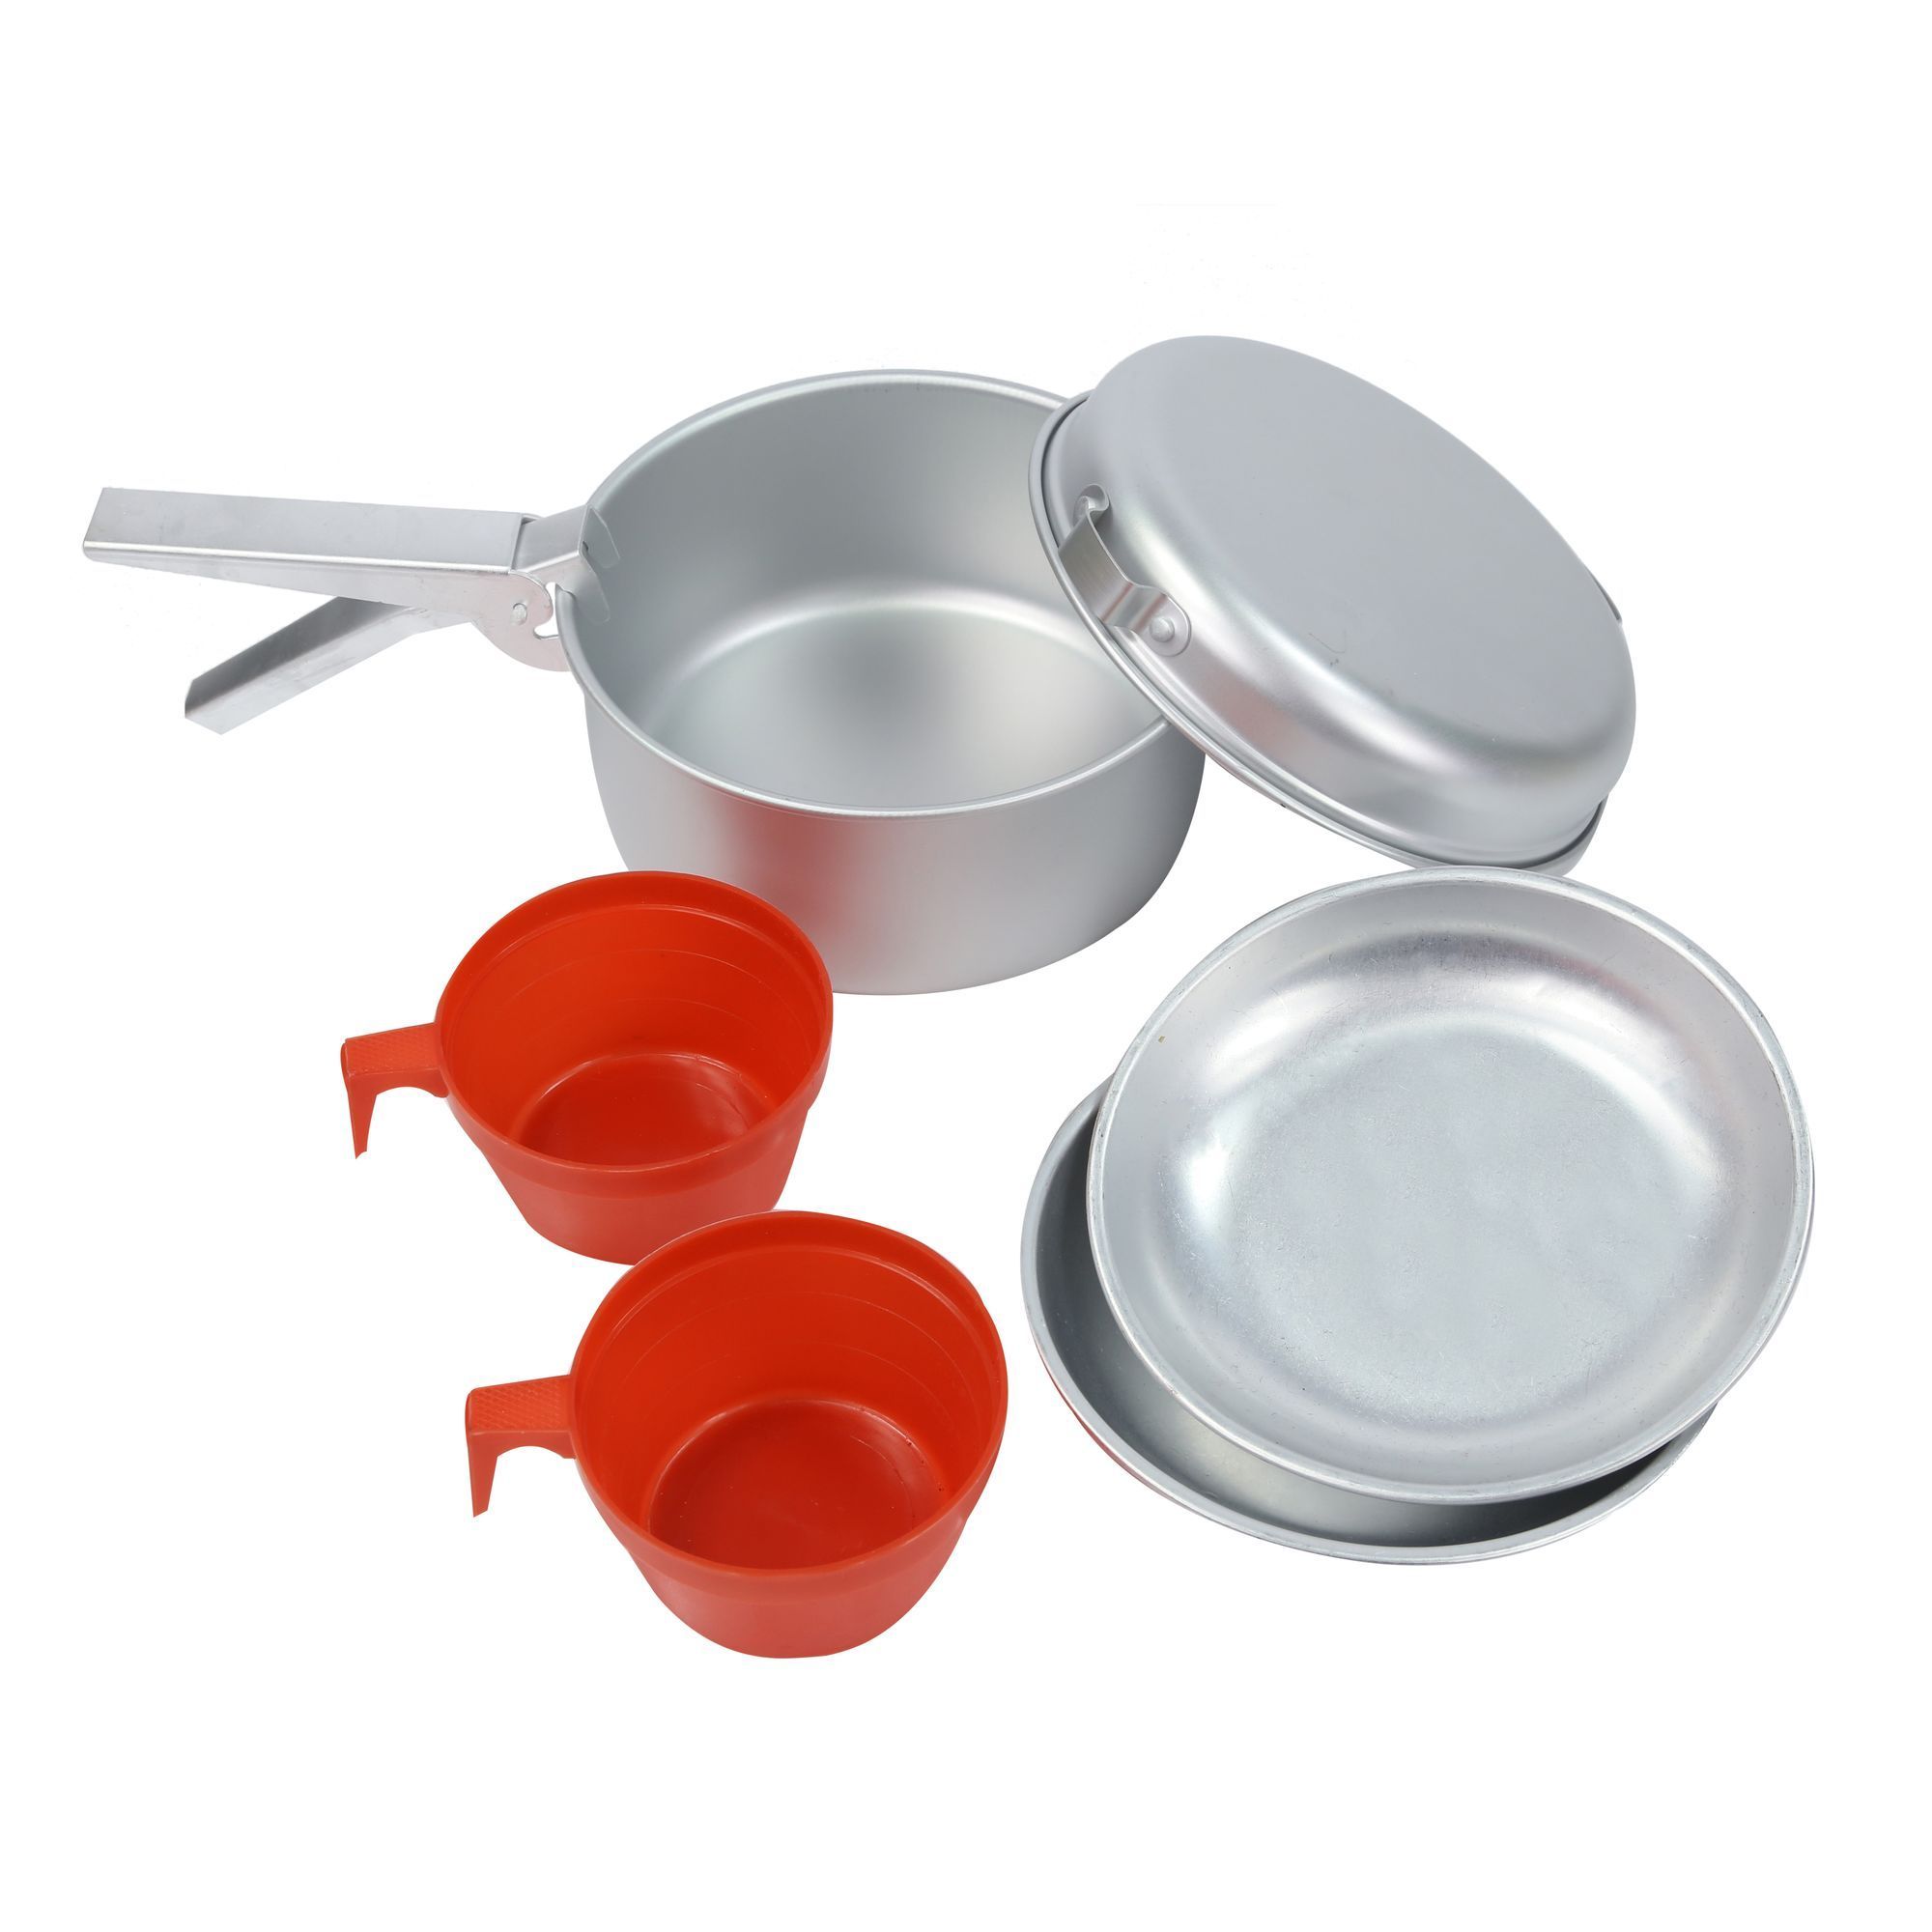 85% aluminium and 15% polypropylene. Lightweight & durable anodised aluminium. Set includes: 18cm frying pan, 16.8cm cooking pot, detachable clamp handle, 2 x plates and 2 x plastic cups.